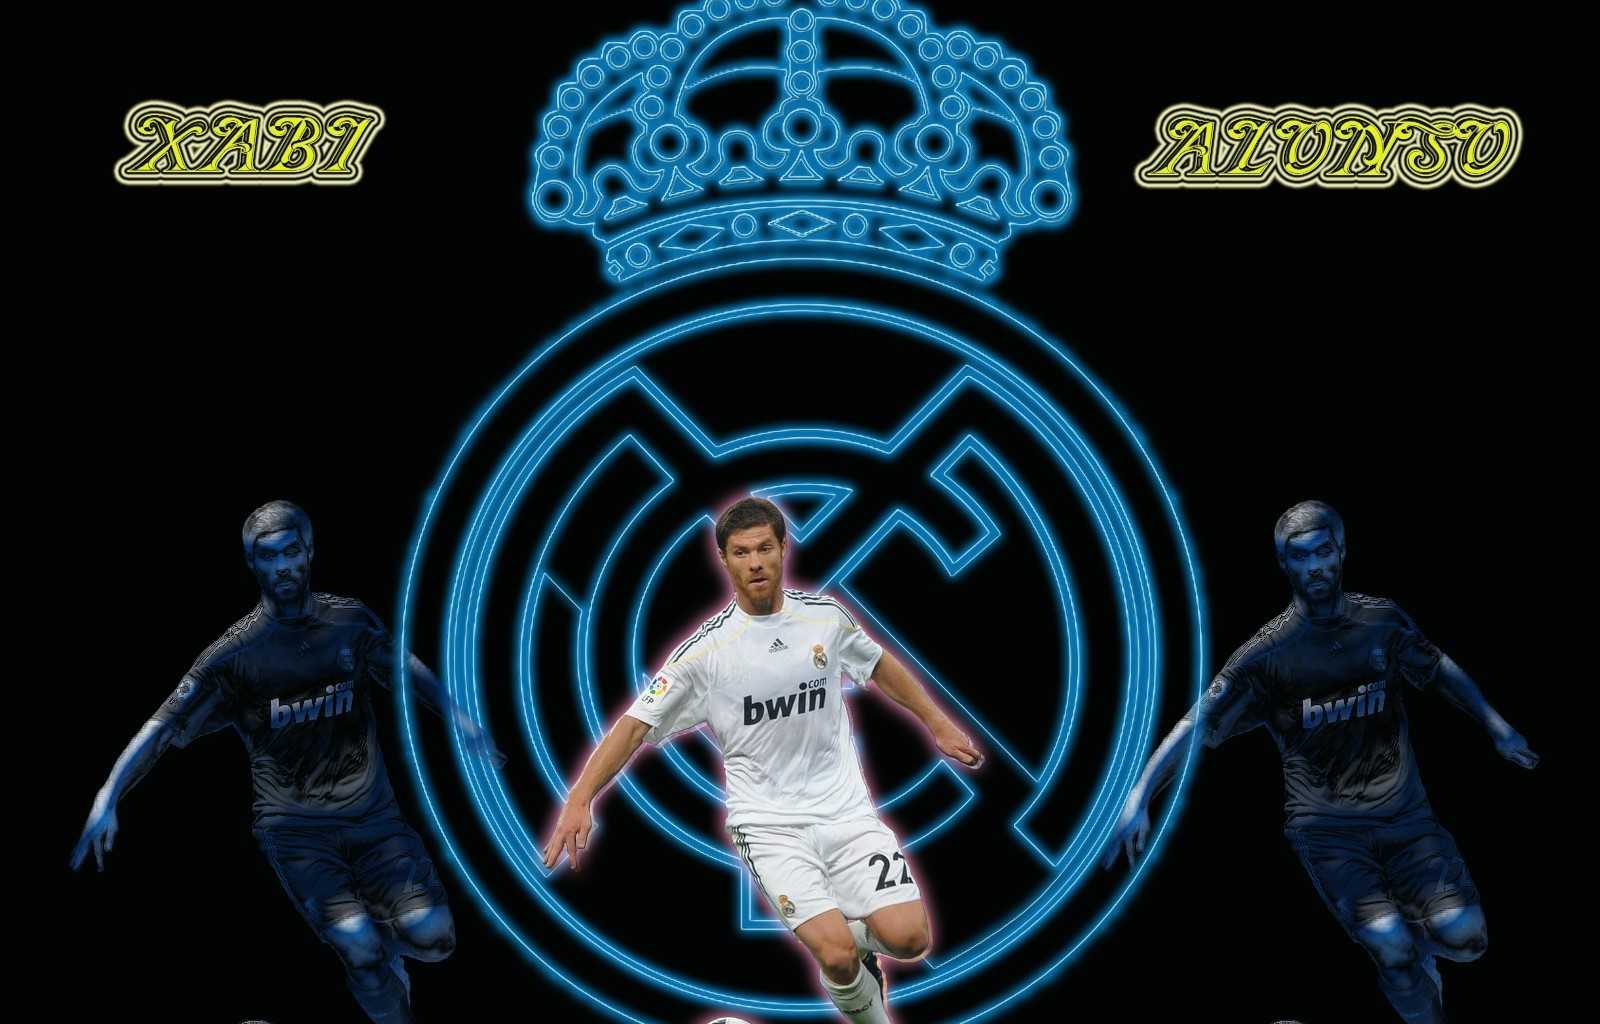 Xabi Alonso Real Madrid Wallpapers Wallpaper Cave